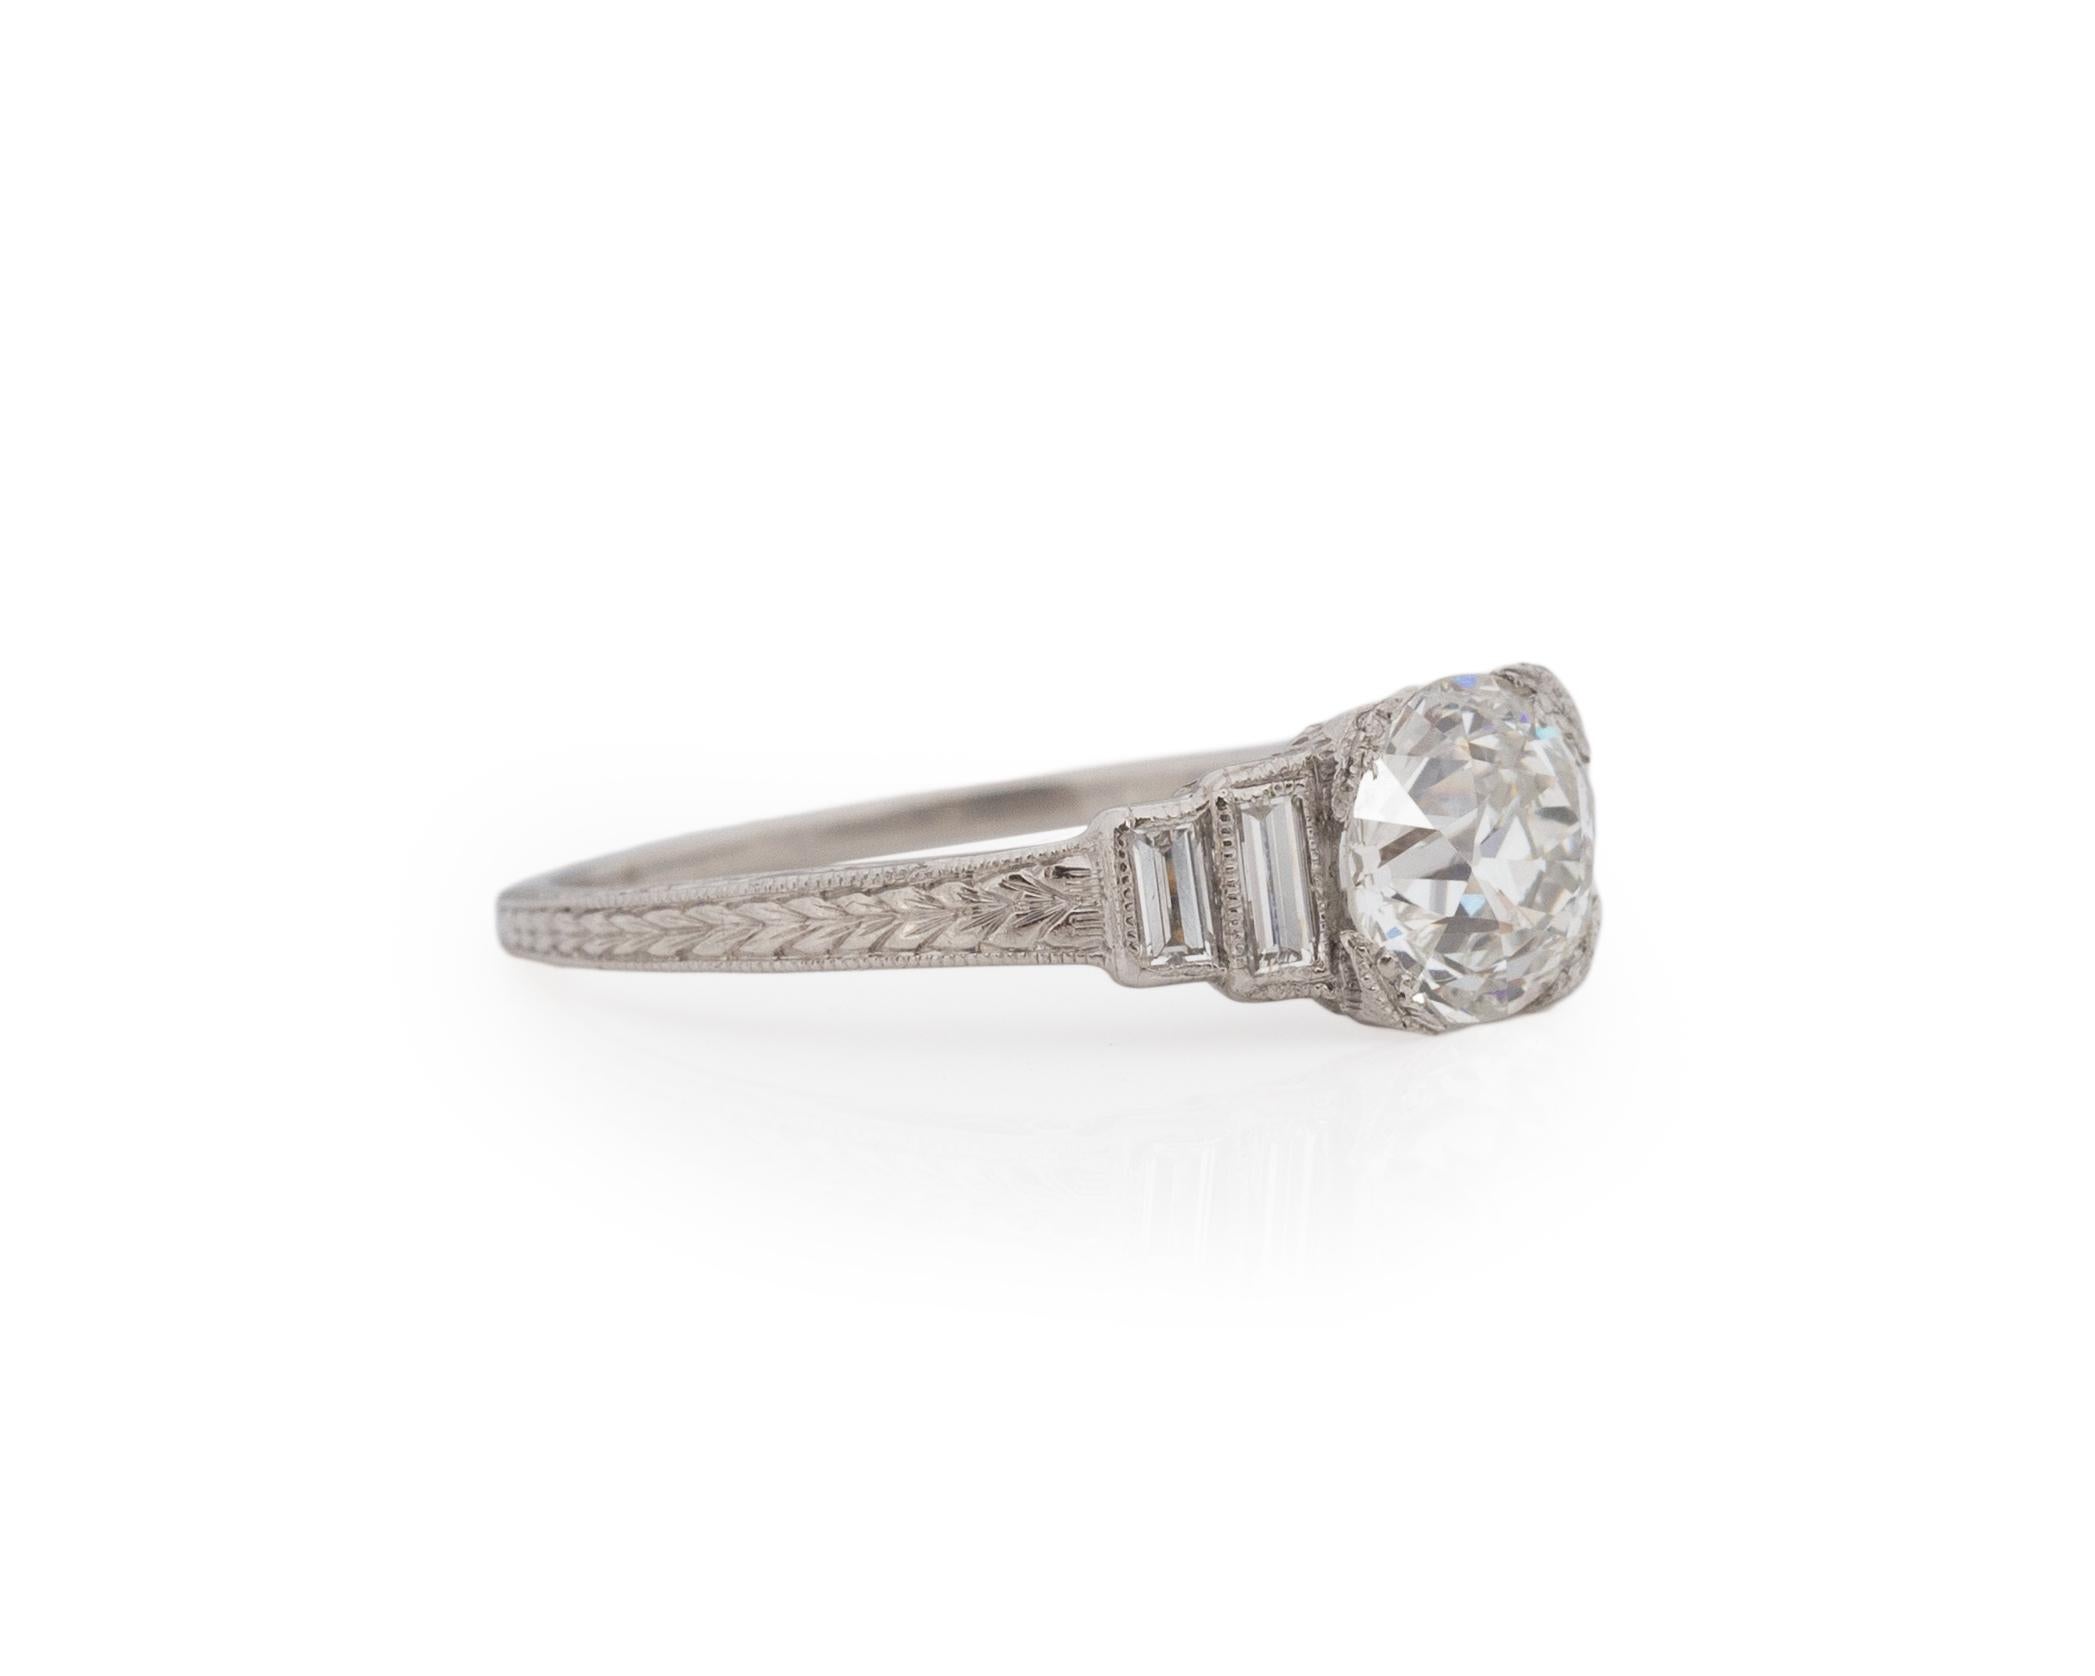 Ring Size: 6
Metal Type: Platinum [Hallmarked, and Tested]
Weight: 3.26 grams

Diamond Details:
GIA REPORT #: 5221530295
Weight: 1.24ct
Cut: Old European brilliant
Color: G
Clarity: SI2
Measurements: 6.79mm x 6.63mm x 4.41mm

Finger to Top of Stone